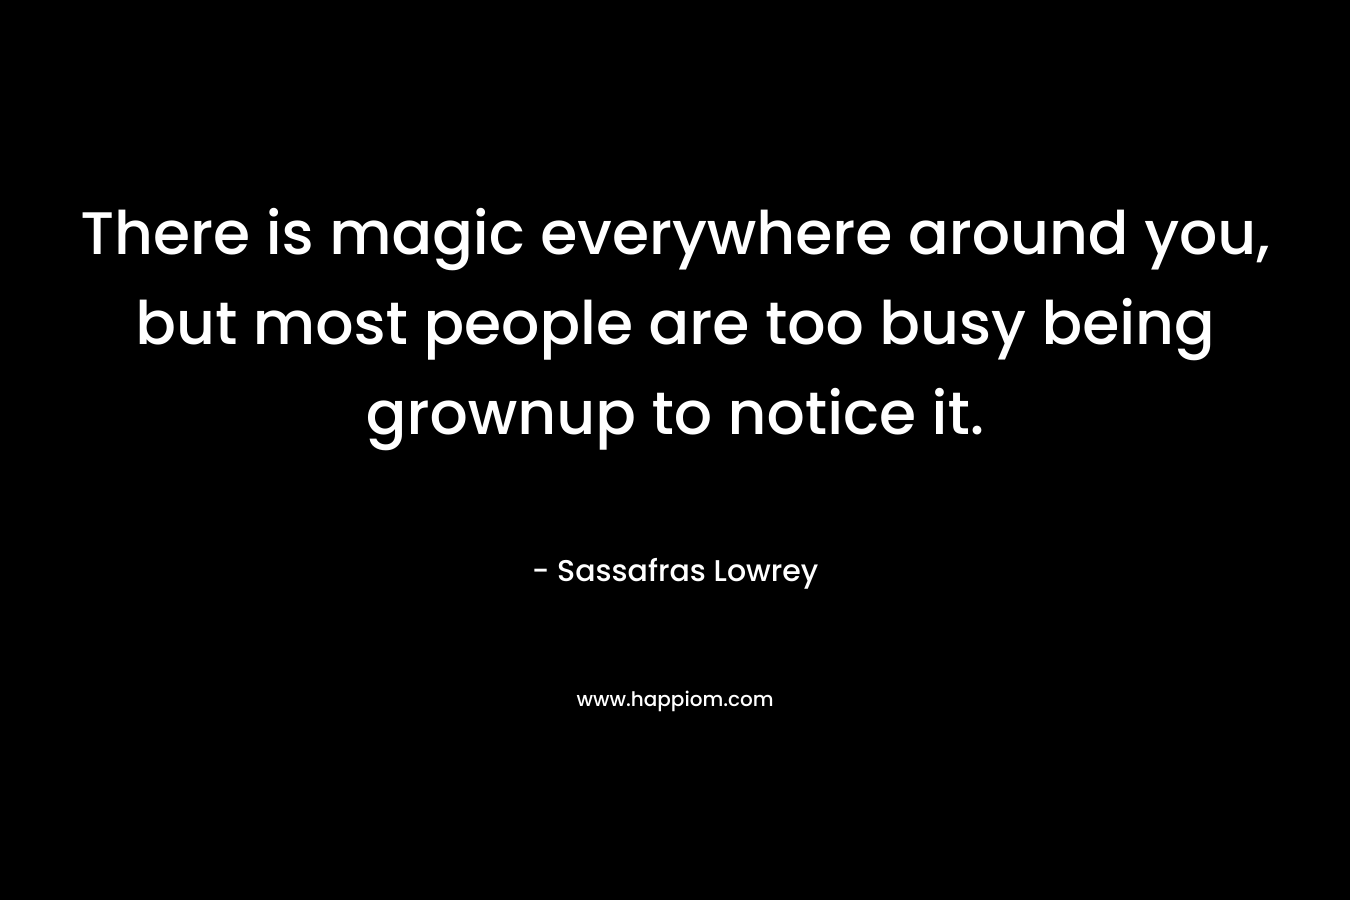 There is magic everywhere around you, but most people are too busy being grownup to notice it.